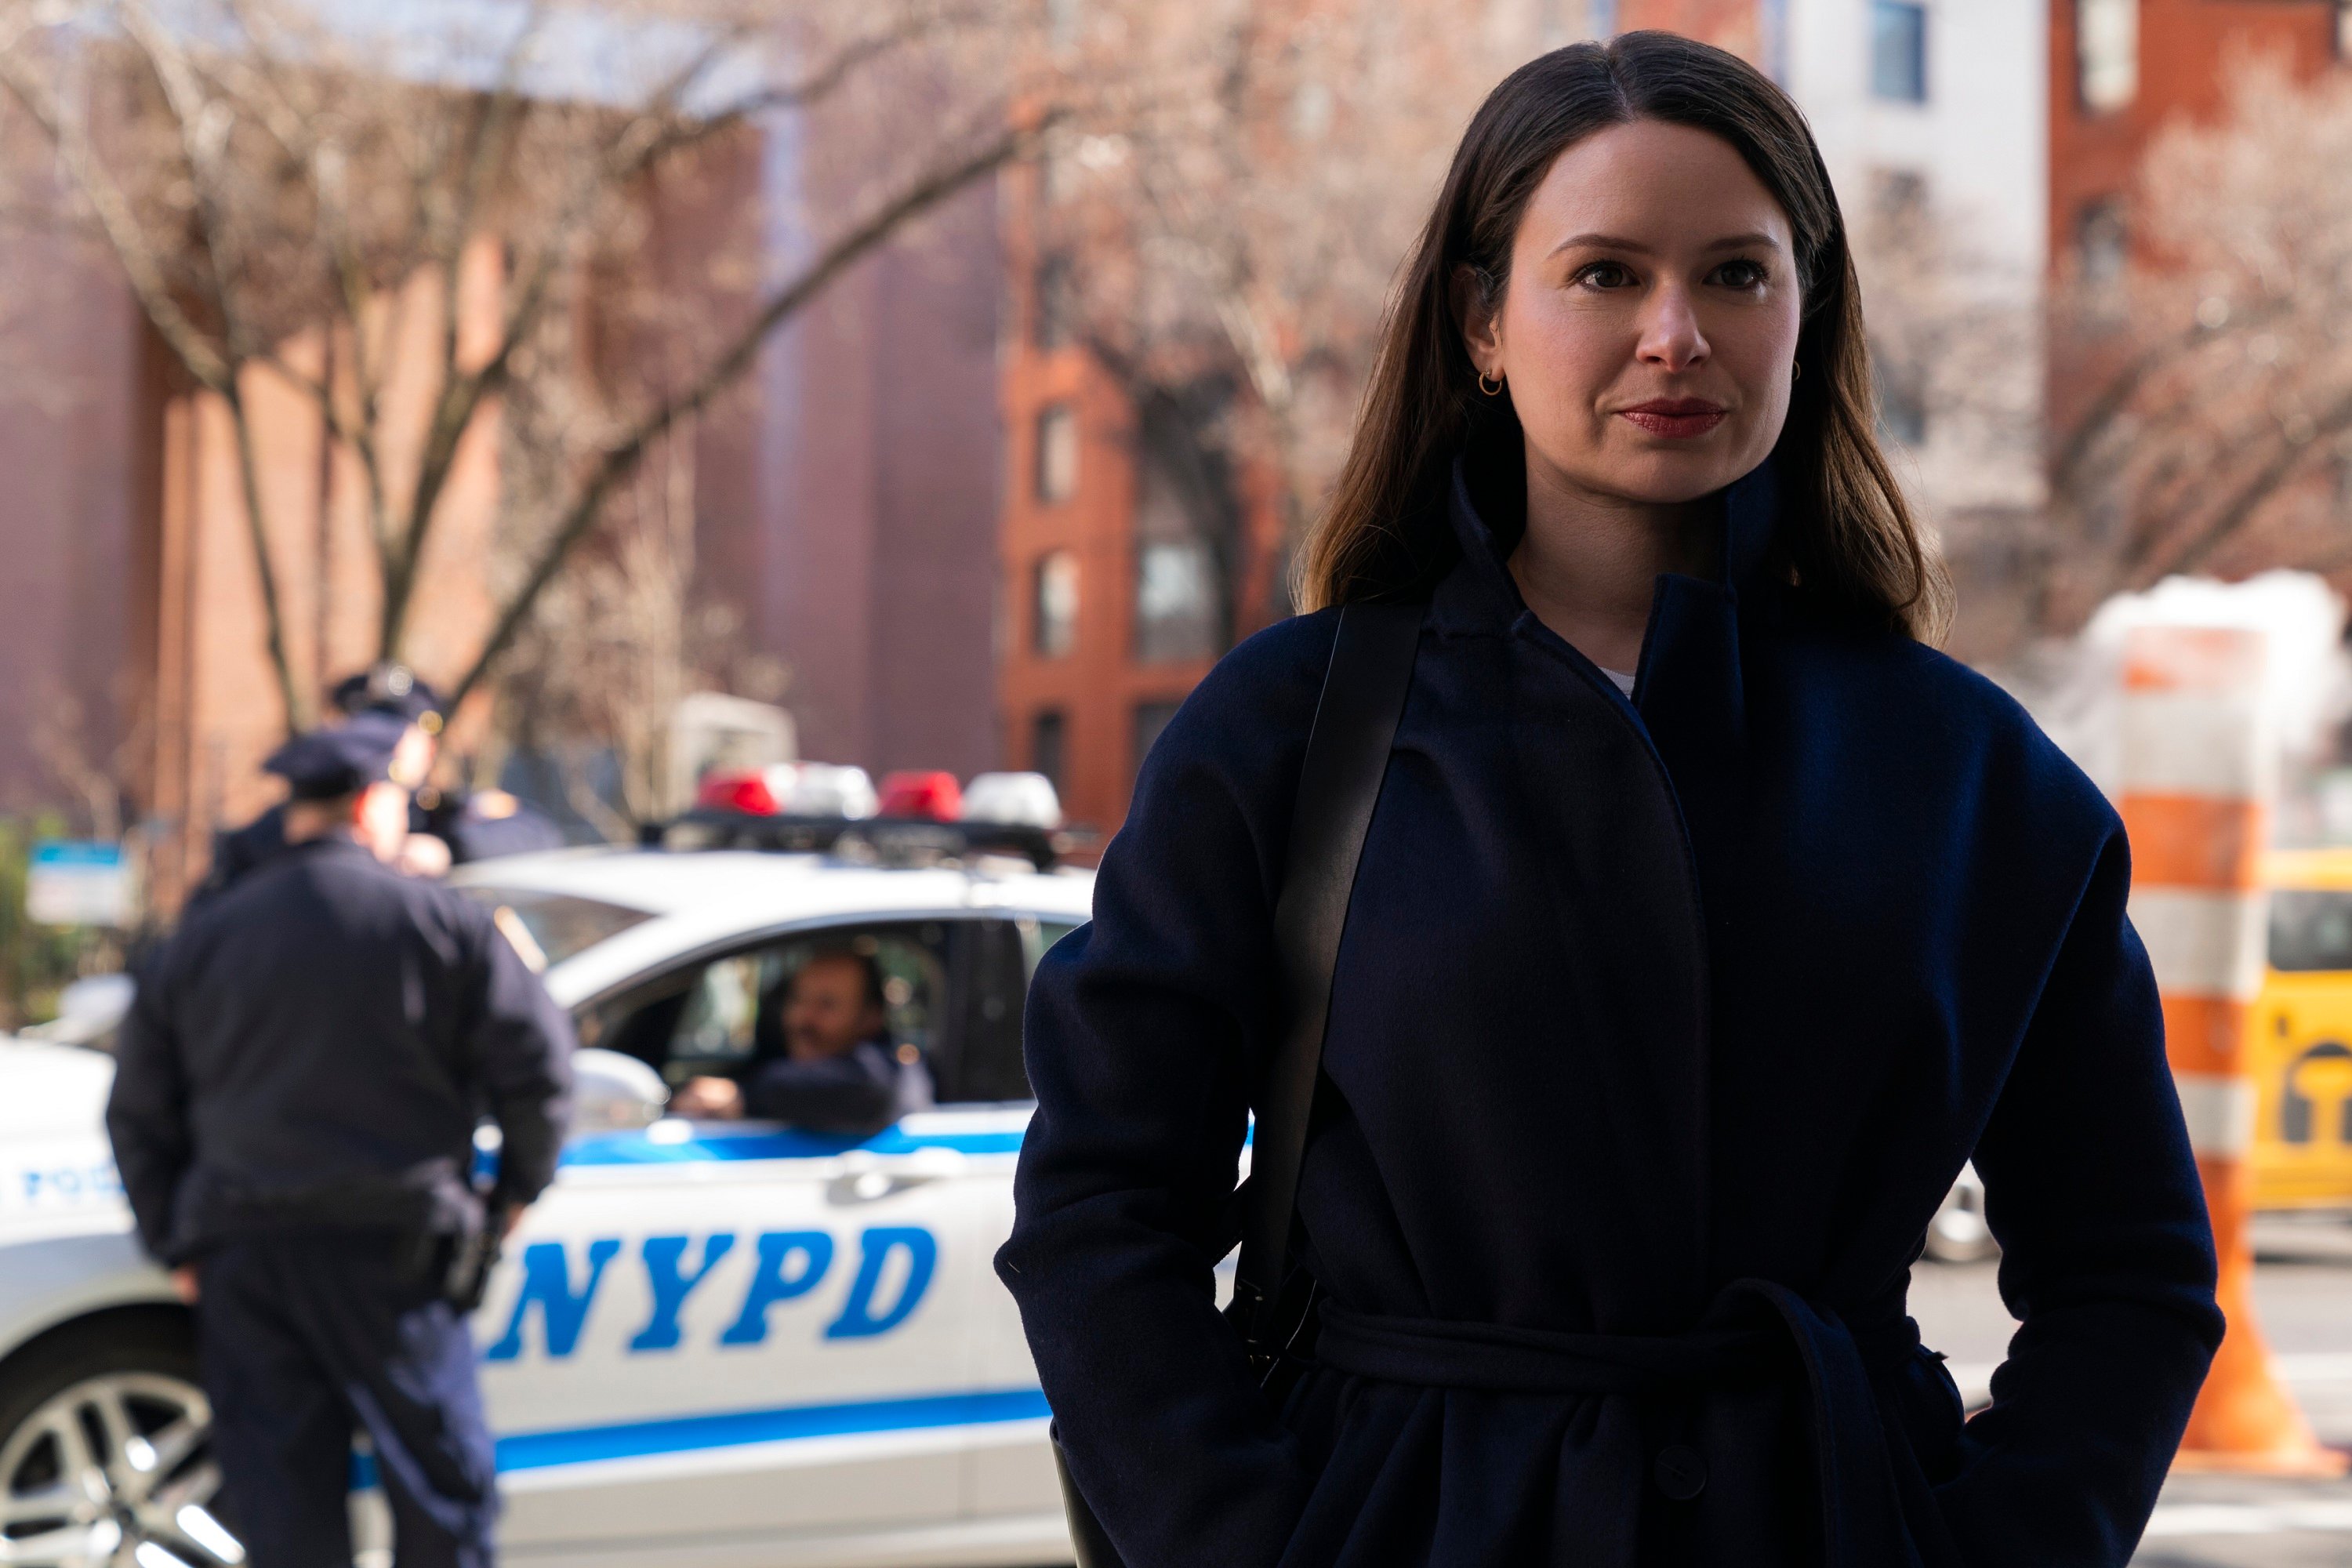 'Inventing Anna' cast member Katie Lowes portrays Rachel Williams standing in front of a police car